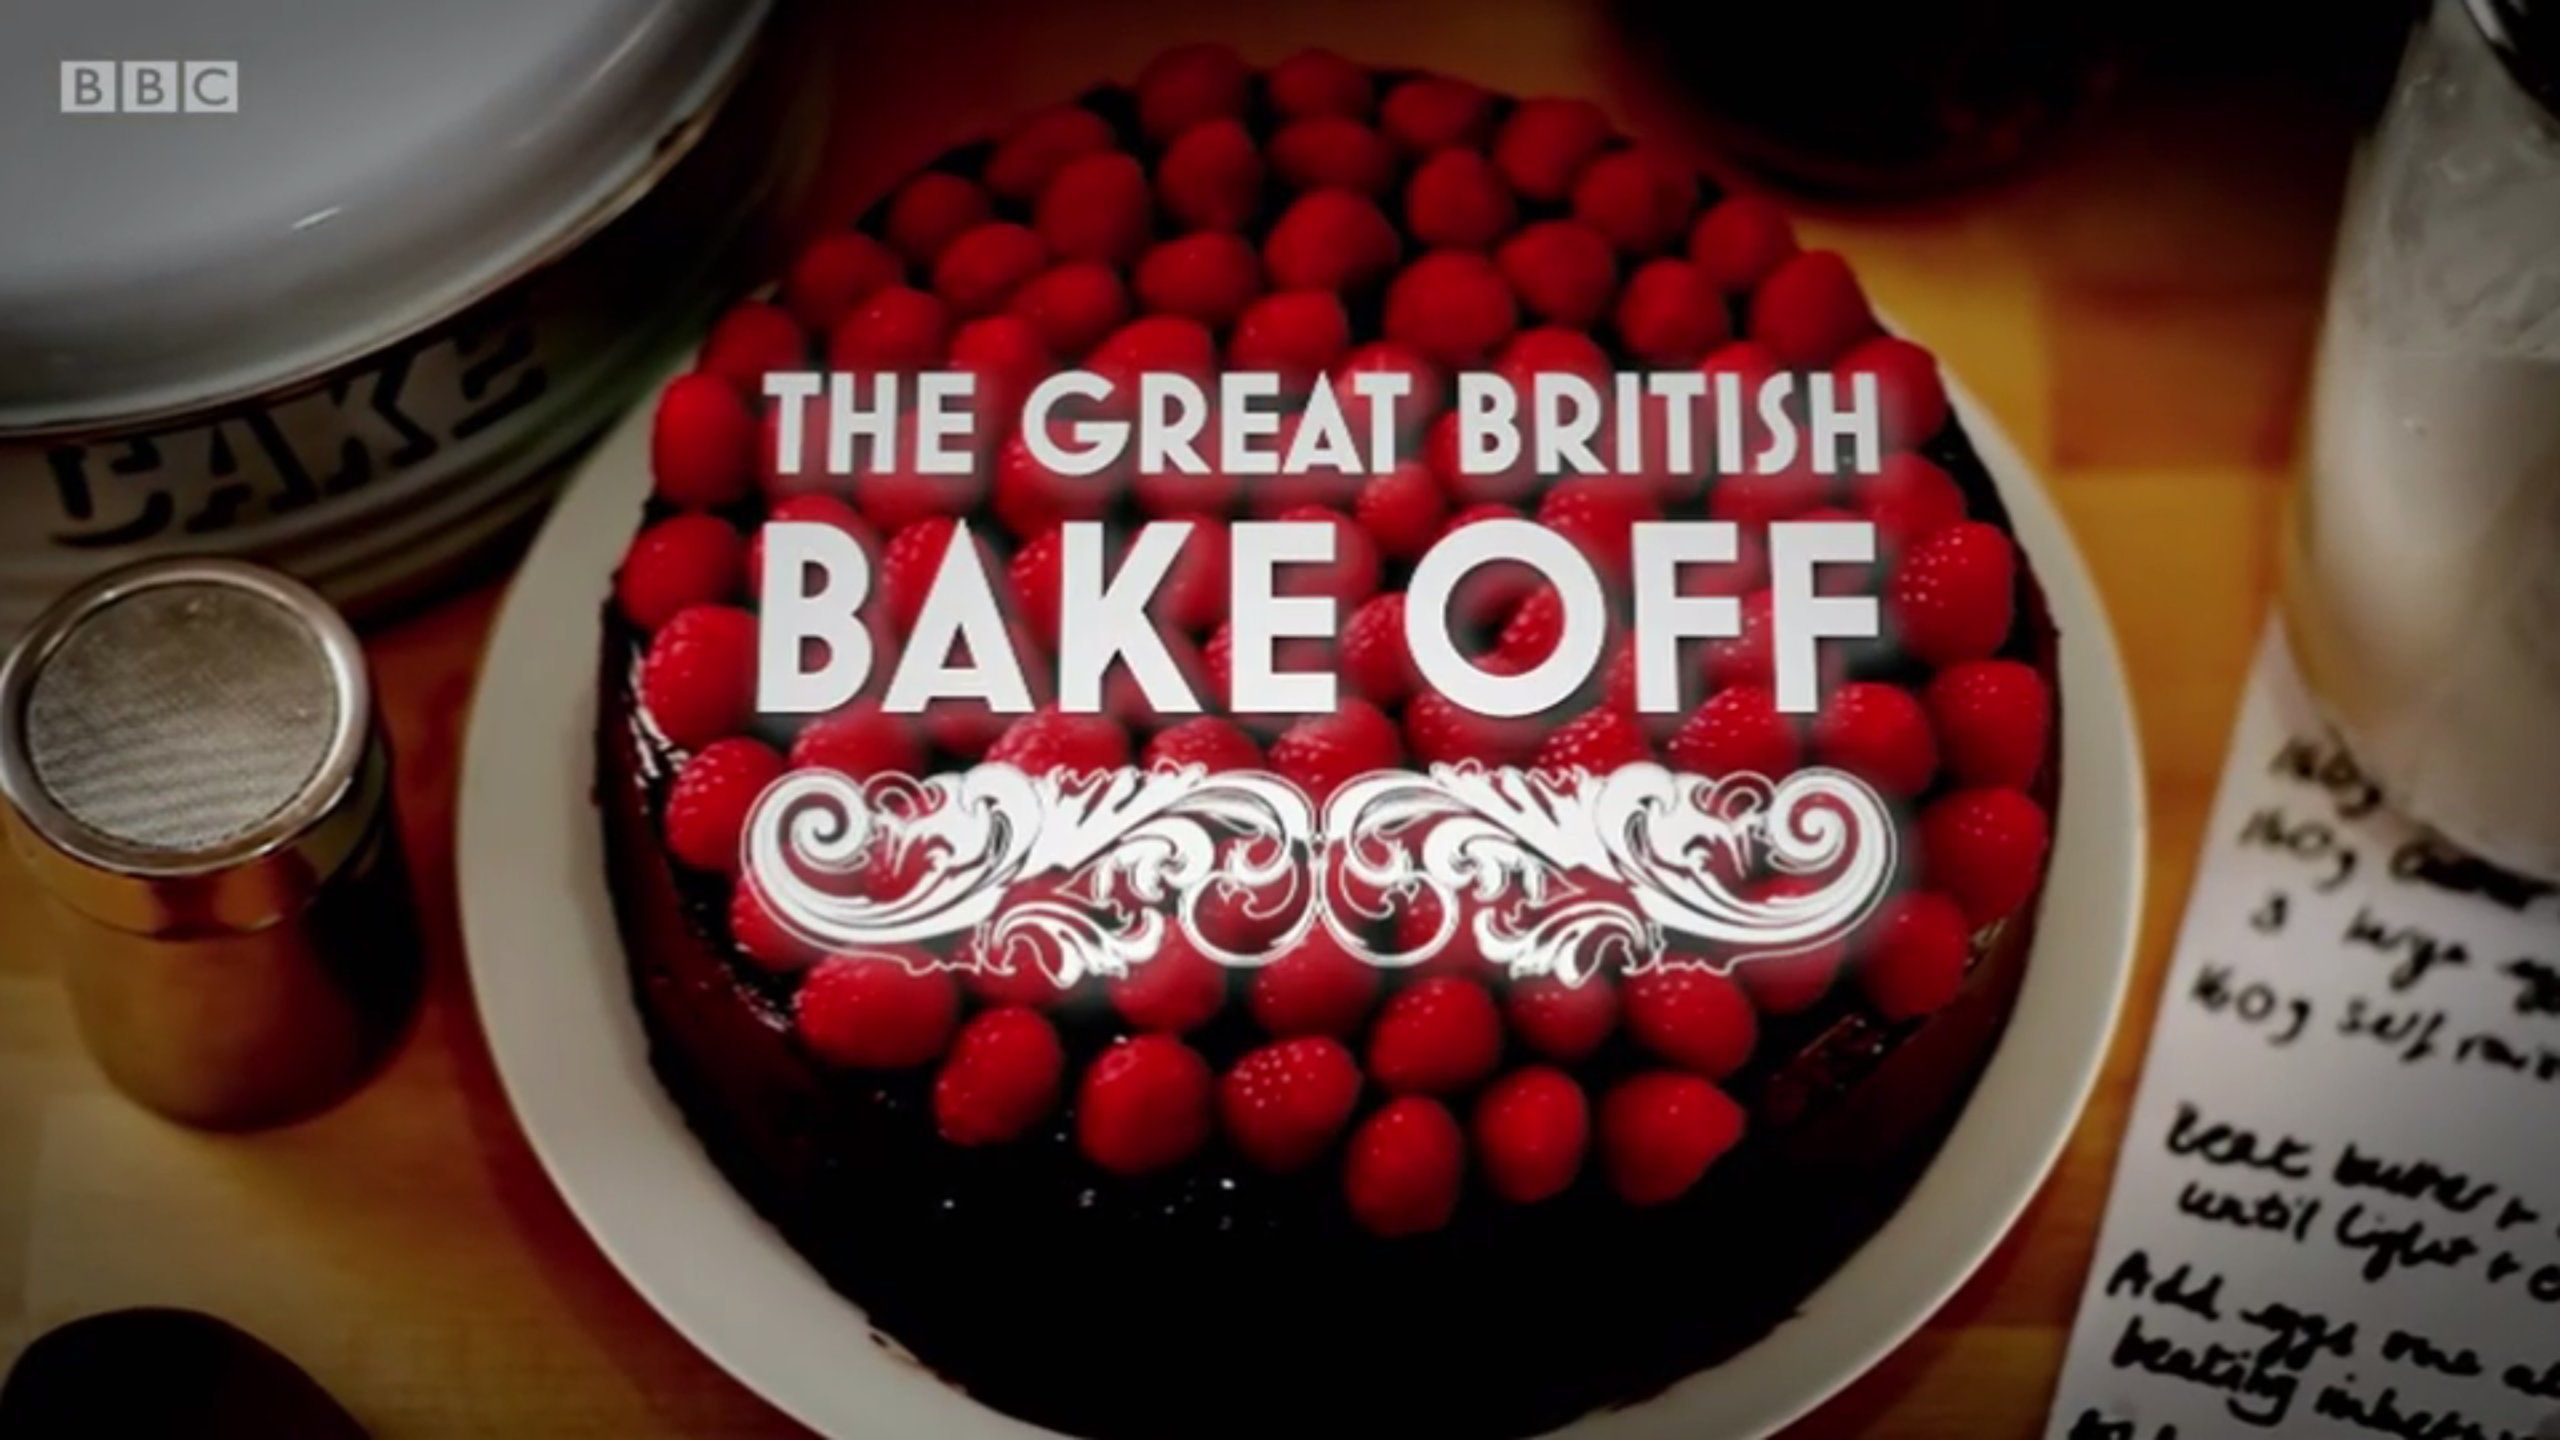 The New Season Of ‘Great British Bake-Off’ Has Officially Finished Filming